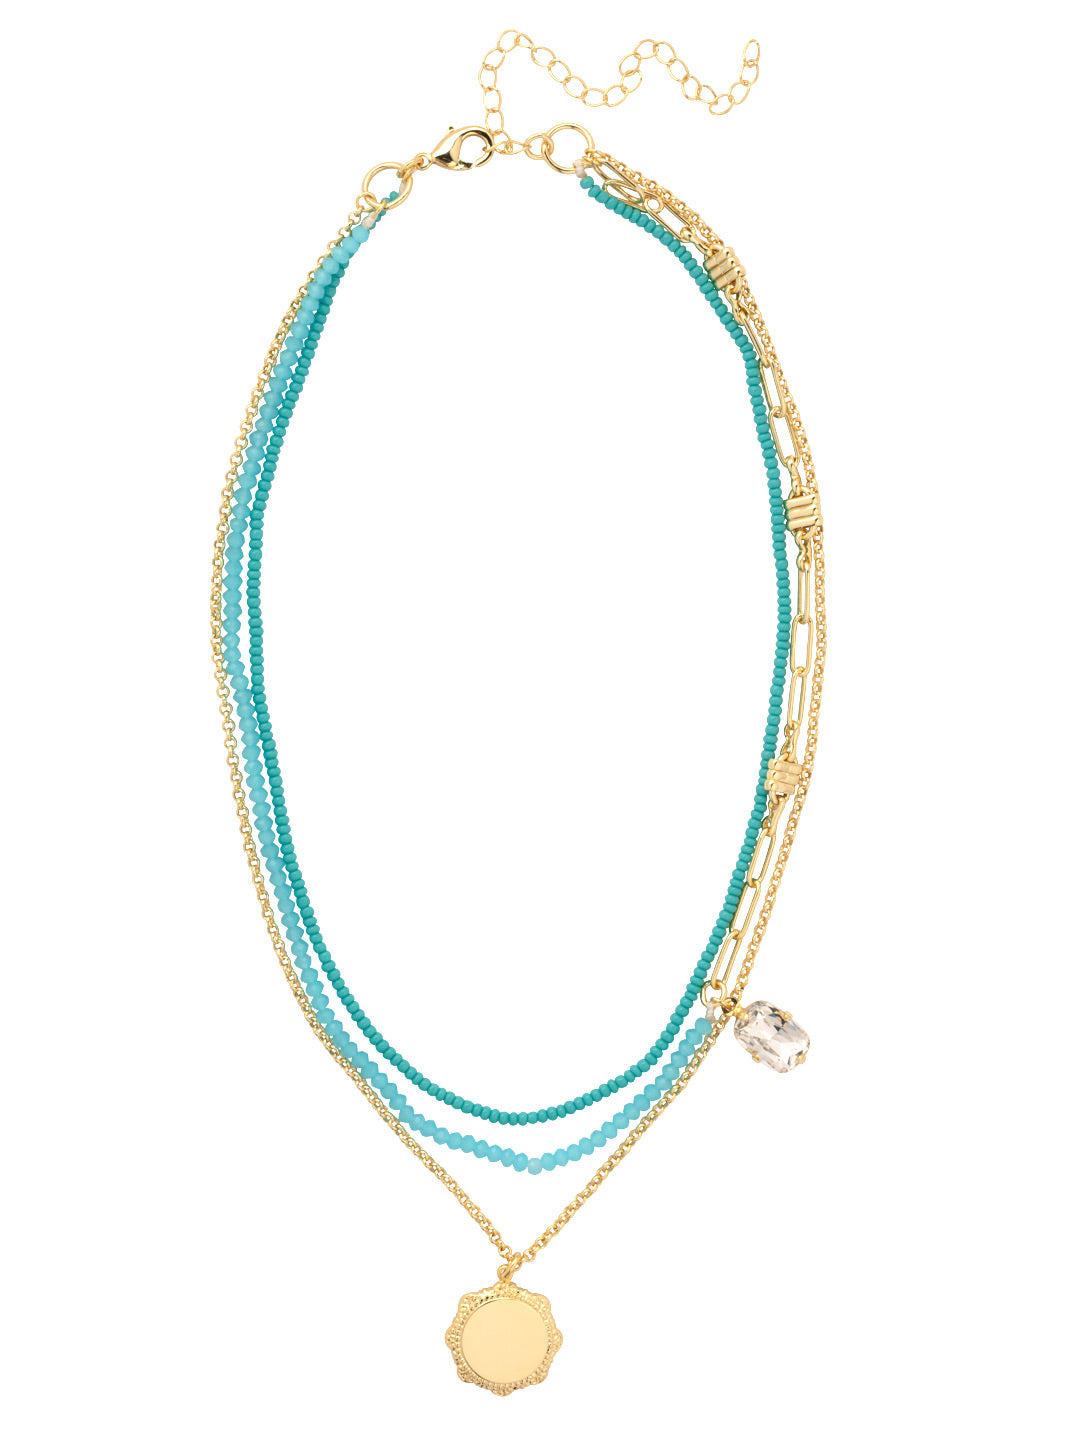 Pura Layered Necklace - 4NFJ7BGTQ - <p>The Pura Layered Necklace features beaded layers, a crystal accent, and a metal disk pendant dangling from a chain, secured by a lobster claw clasp. From Sorrelli's Turquoise collection in our Bright Gold-tone finish.</p>